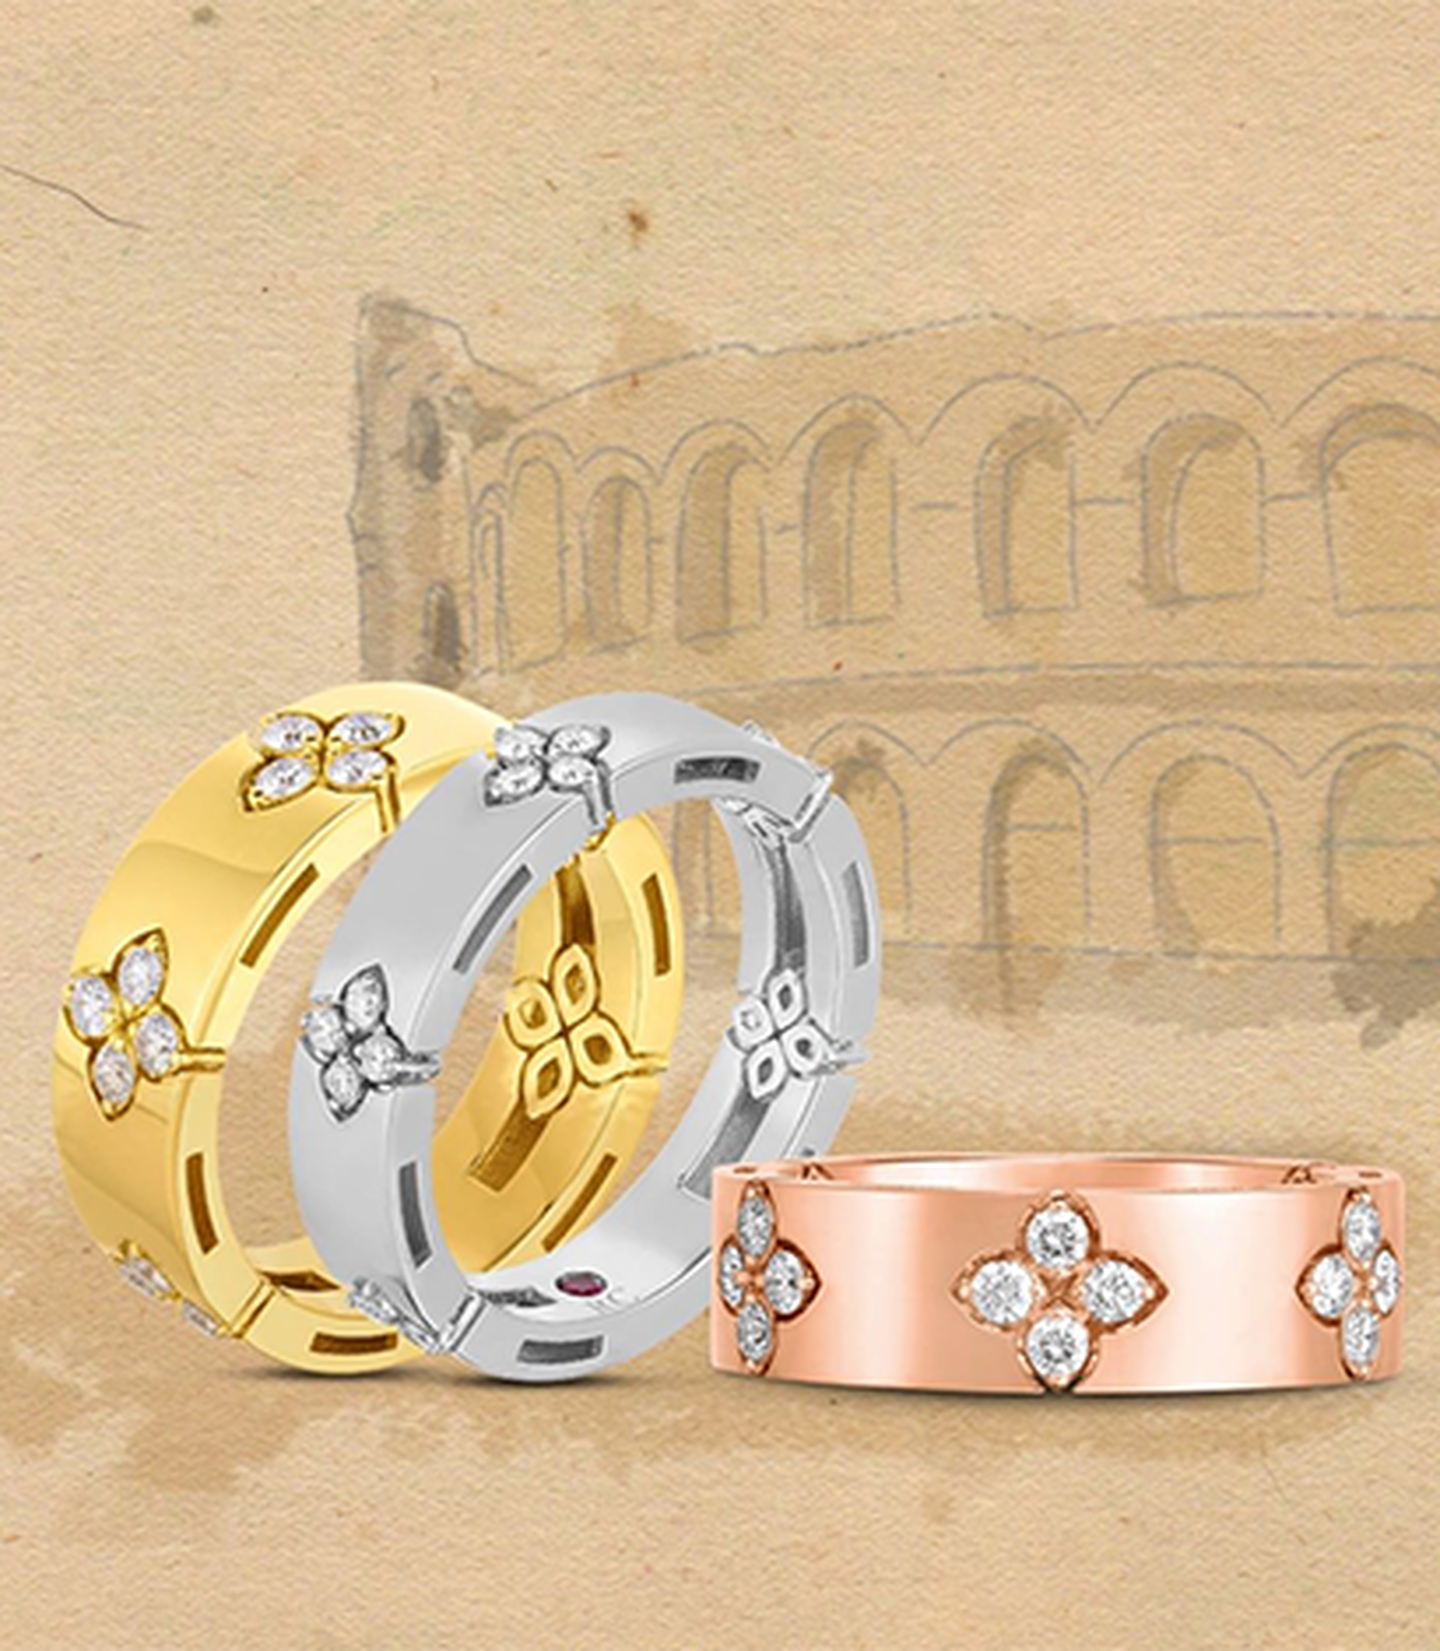 Three Roberto Coin Love in Verona rings in yellow, white and rose gold.